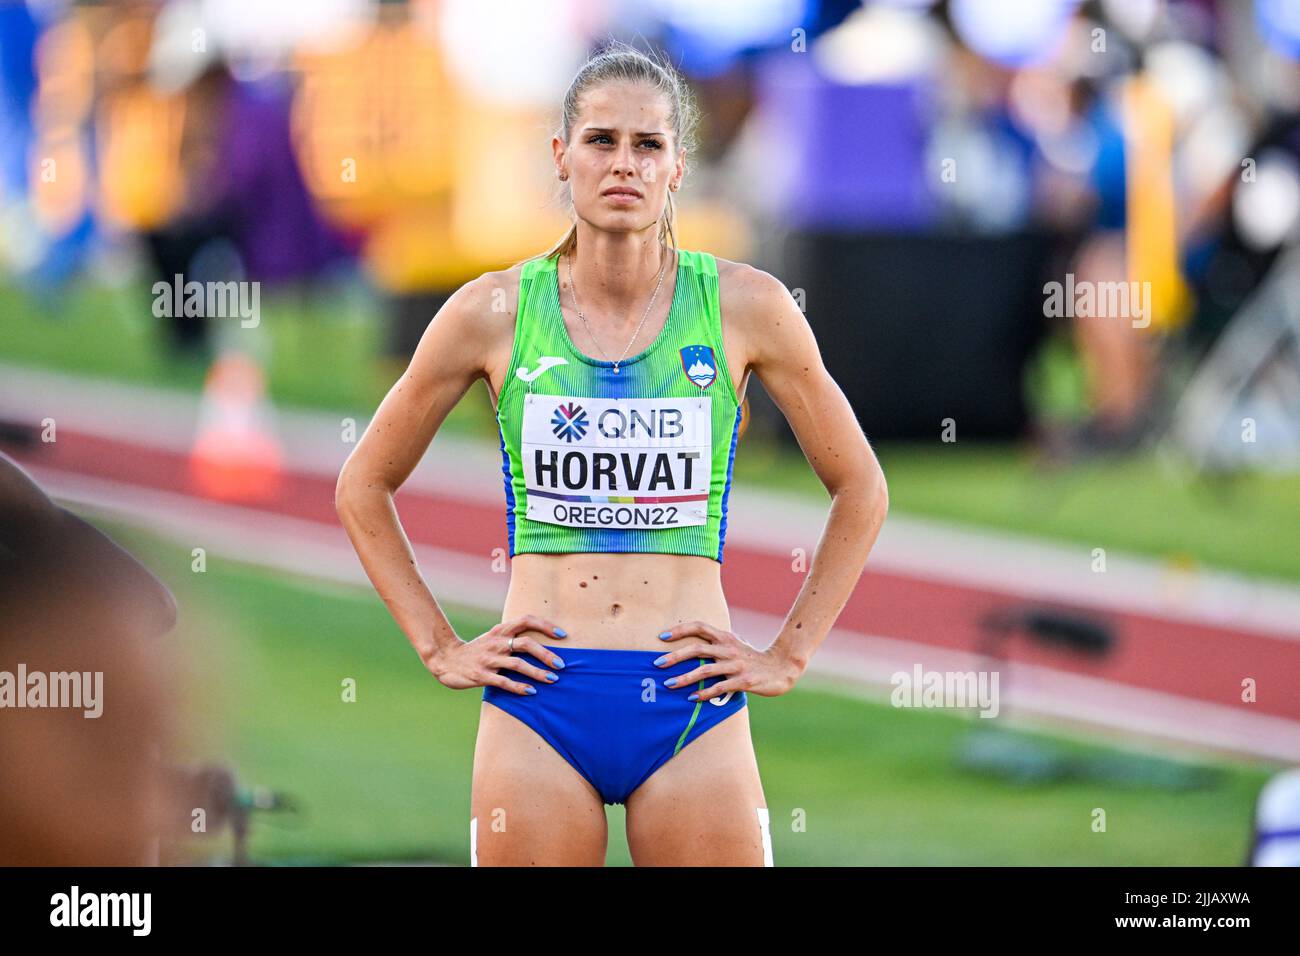 EUGENE, UNITED STATES - JULY 24: Anita Horvat of Slovenia competing on  Women's 800m during the World